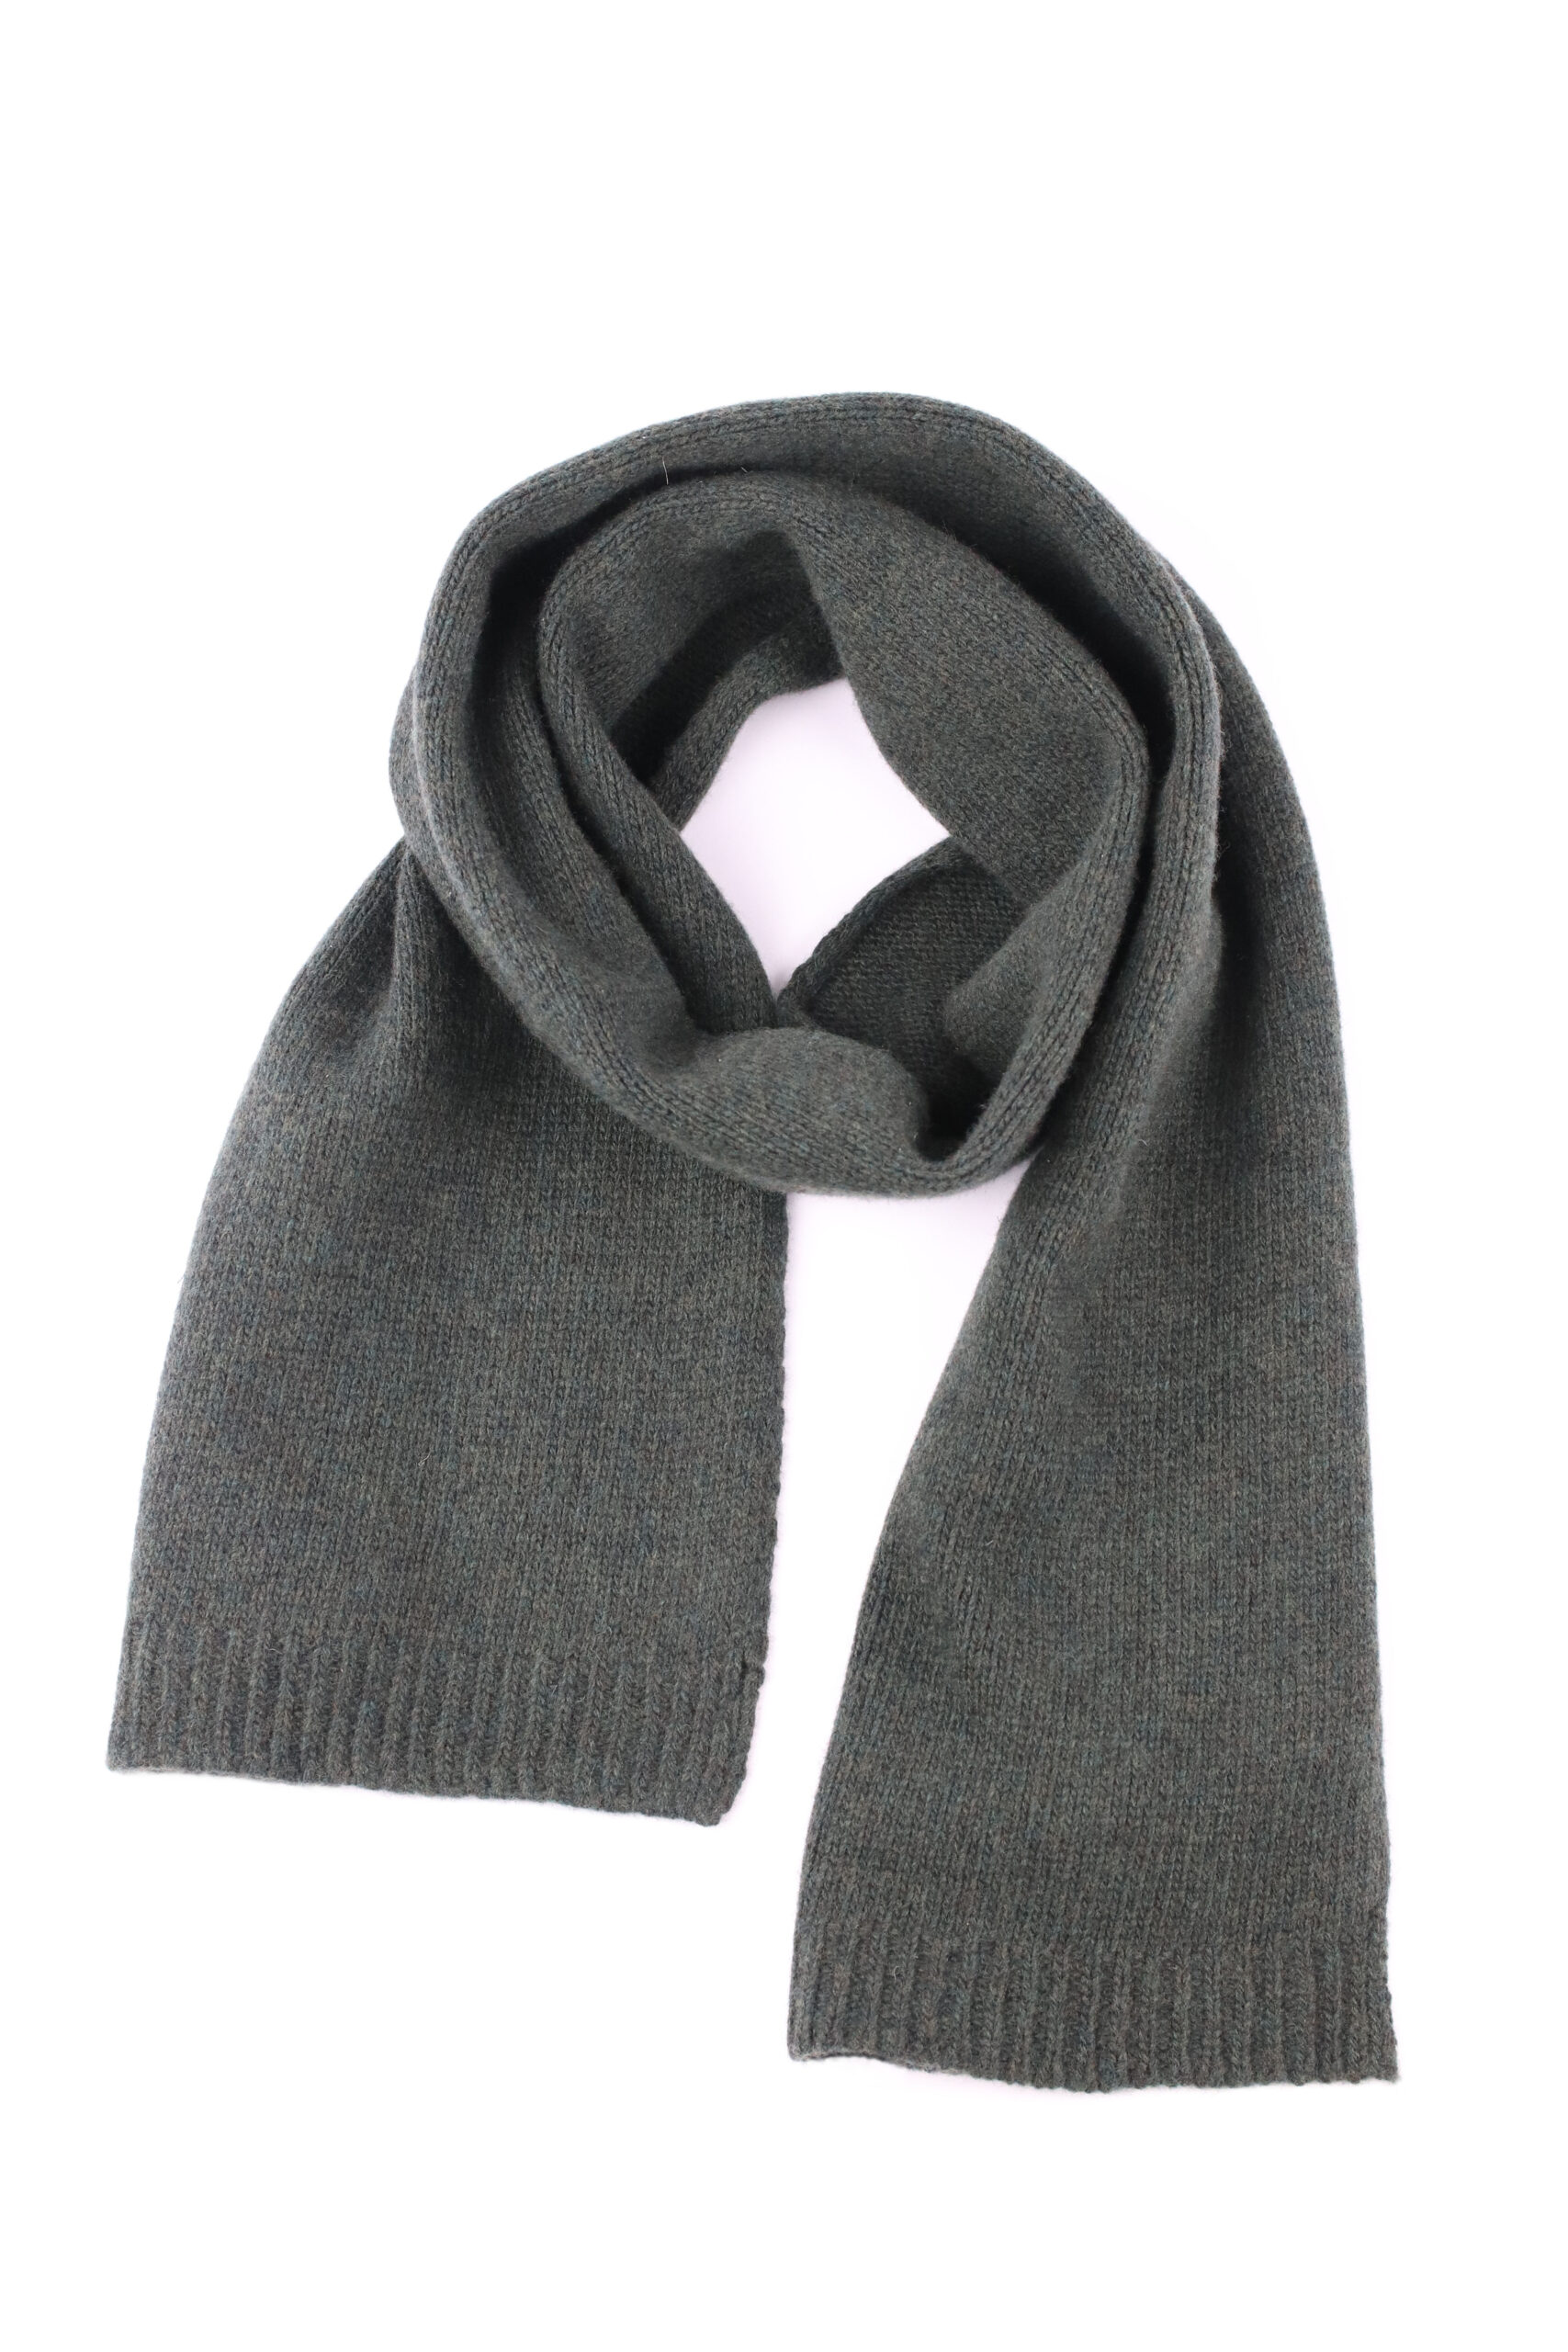 Image of a grey cashmere scarf